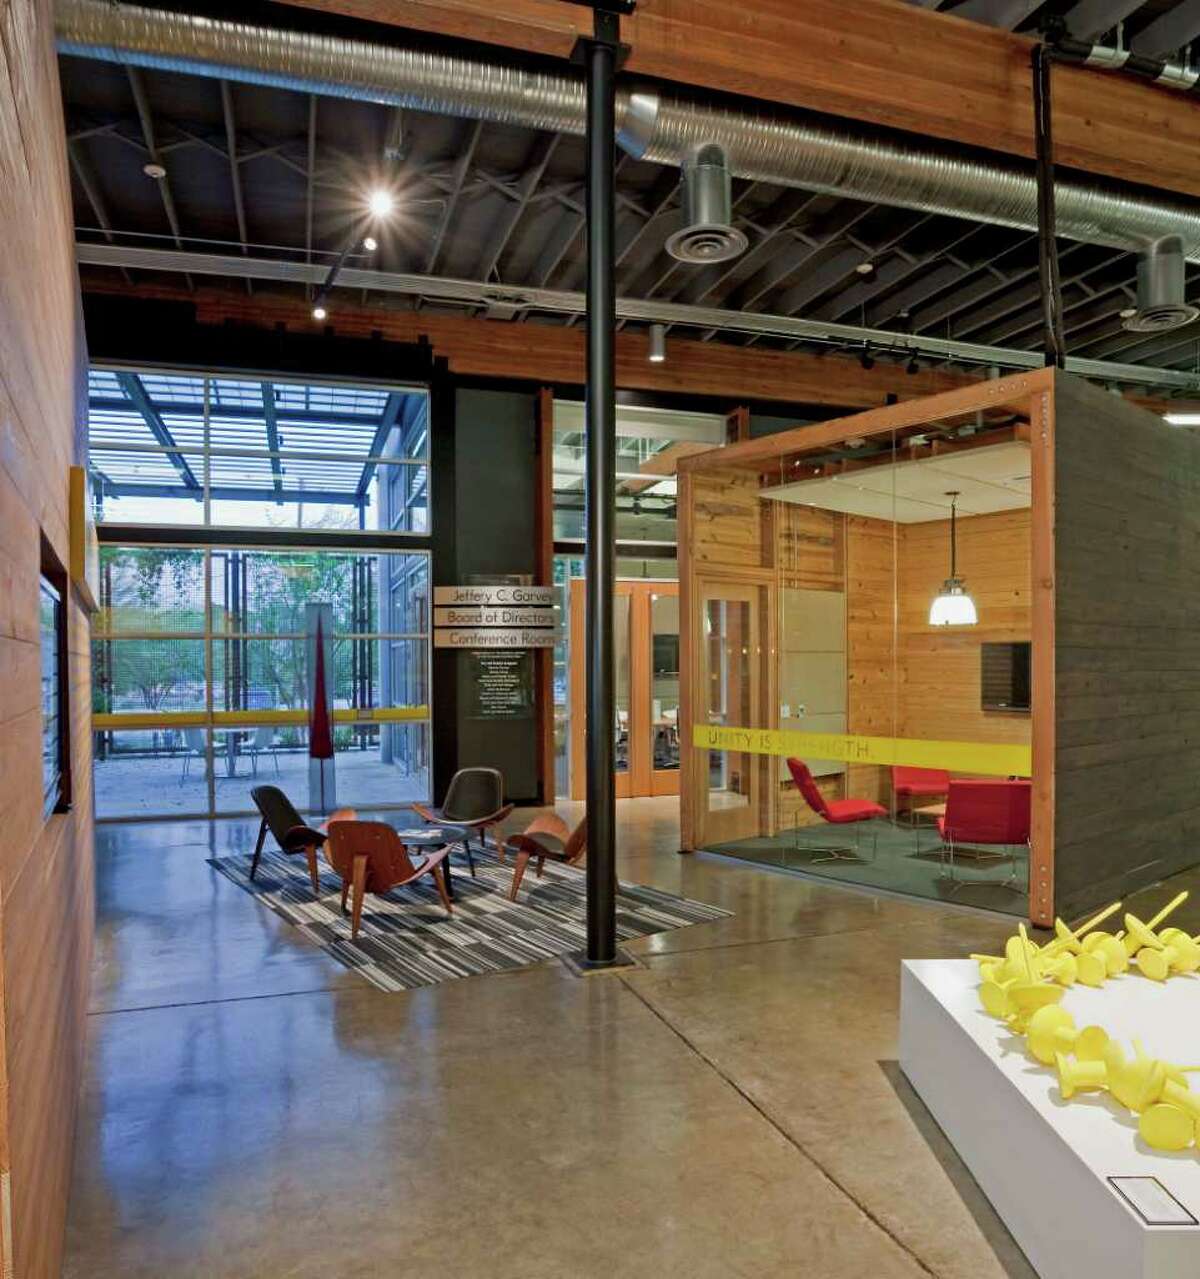 The interior of the LiveStrong Foundation in Austin.